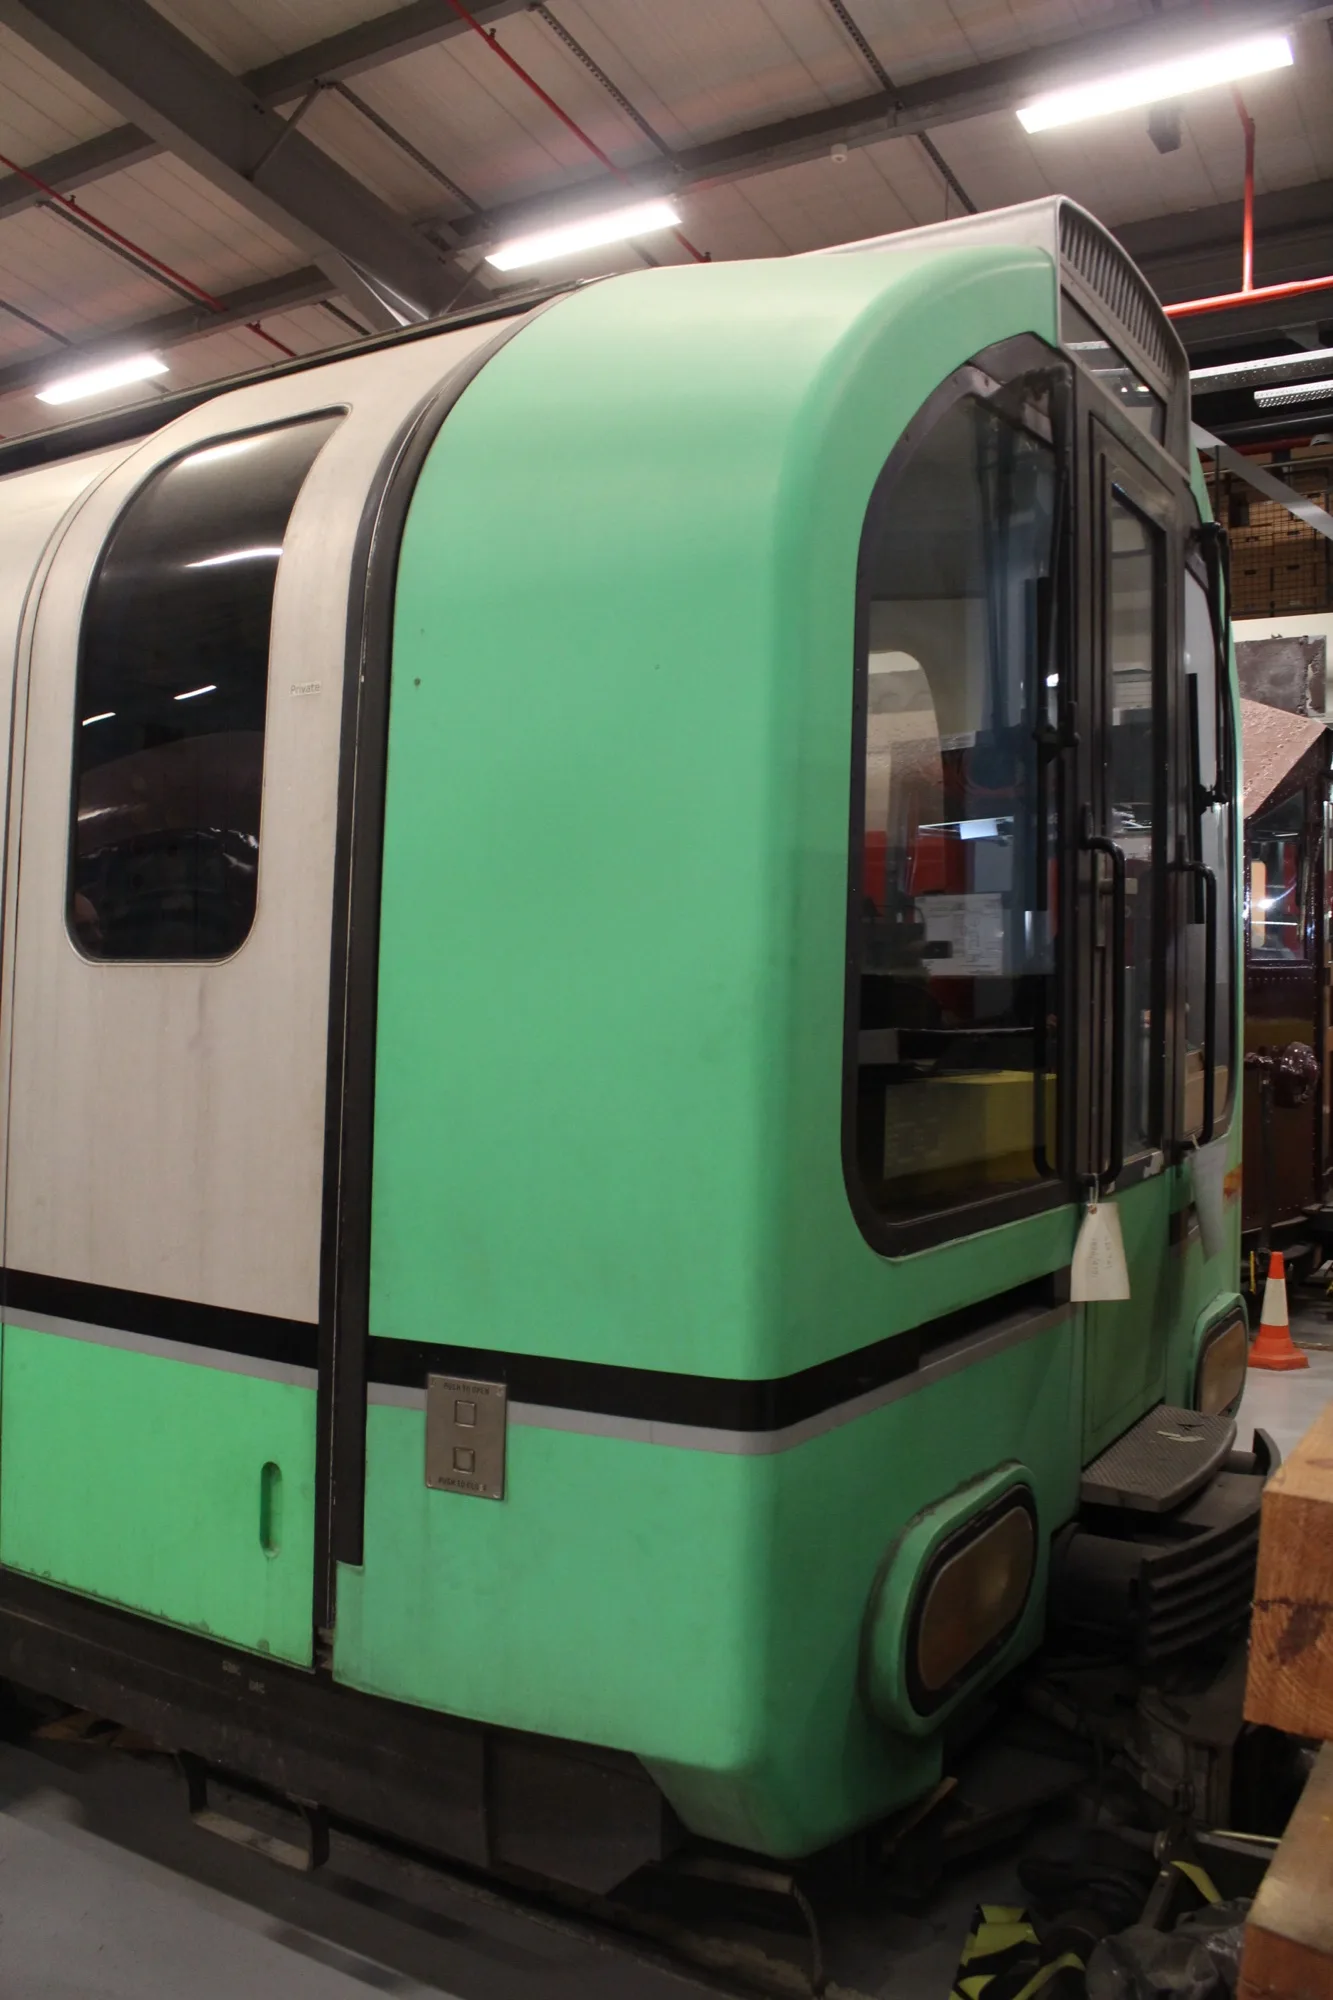 A photo of a prototype train for the Central Line, now on display at the London Transport Museum Depot in Acton